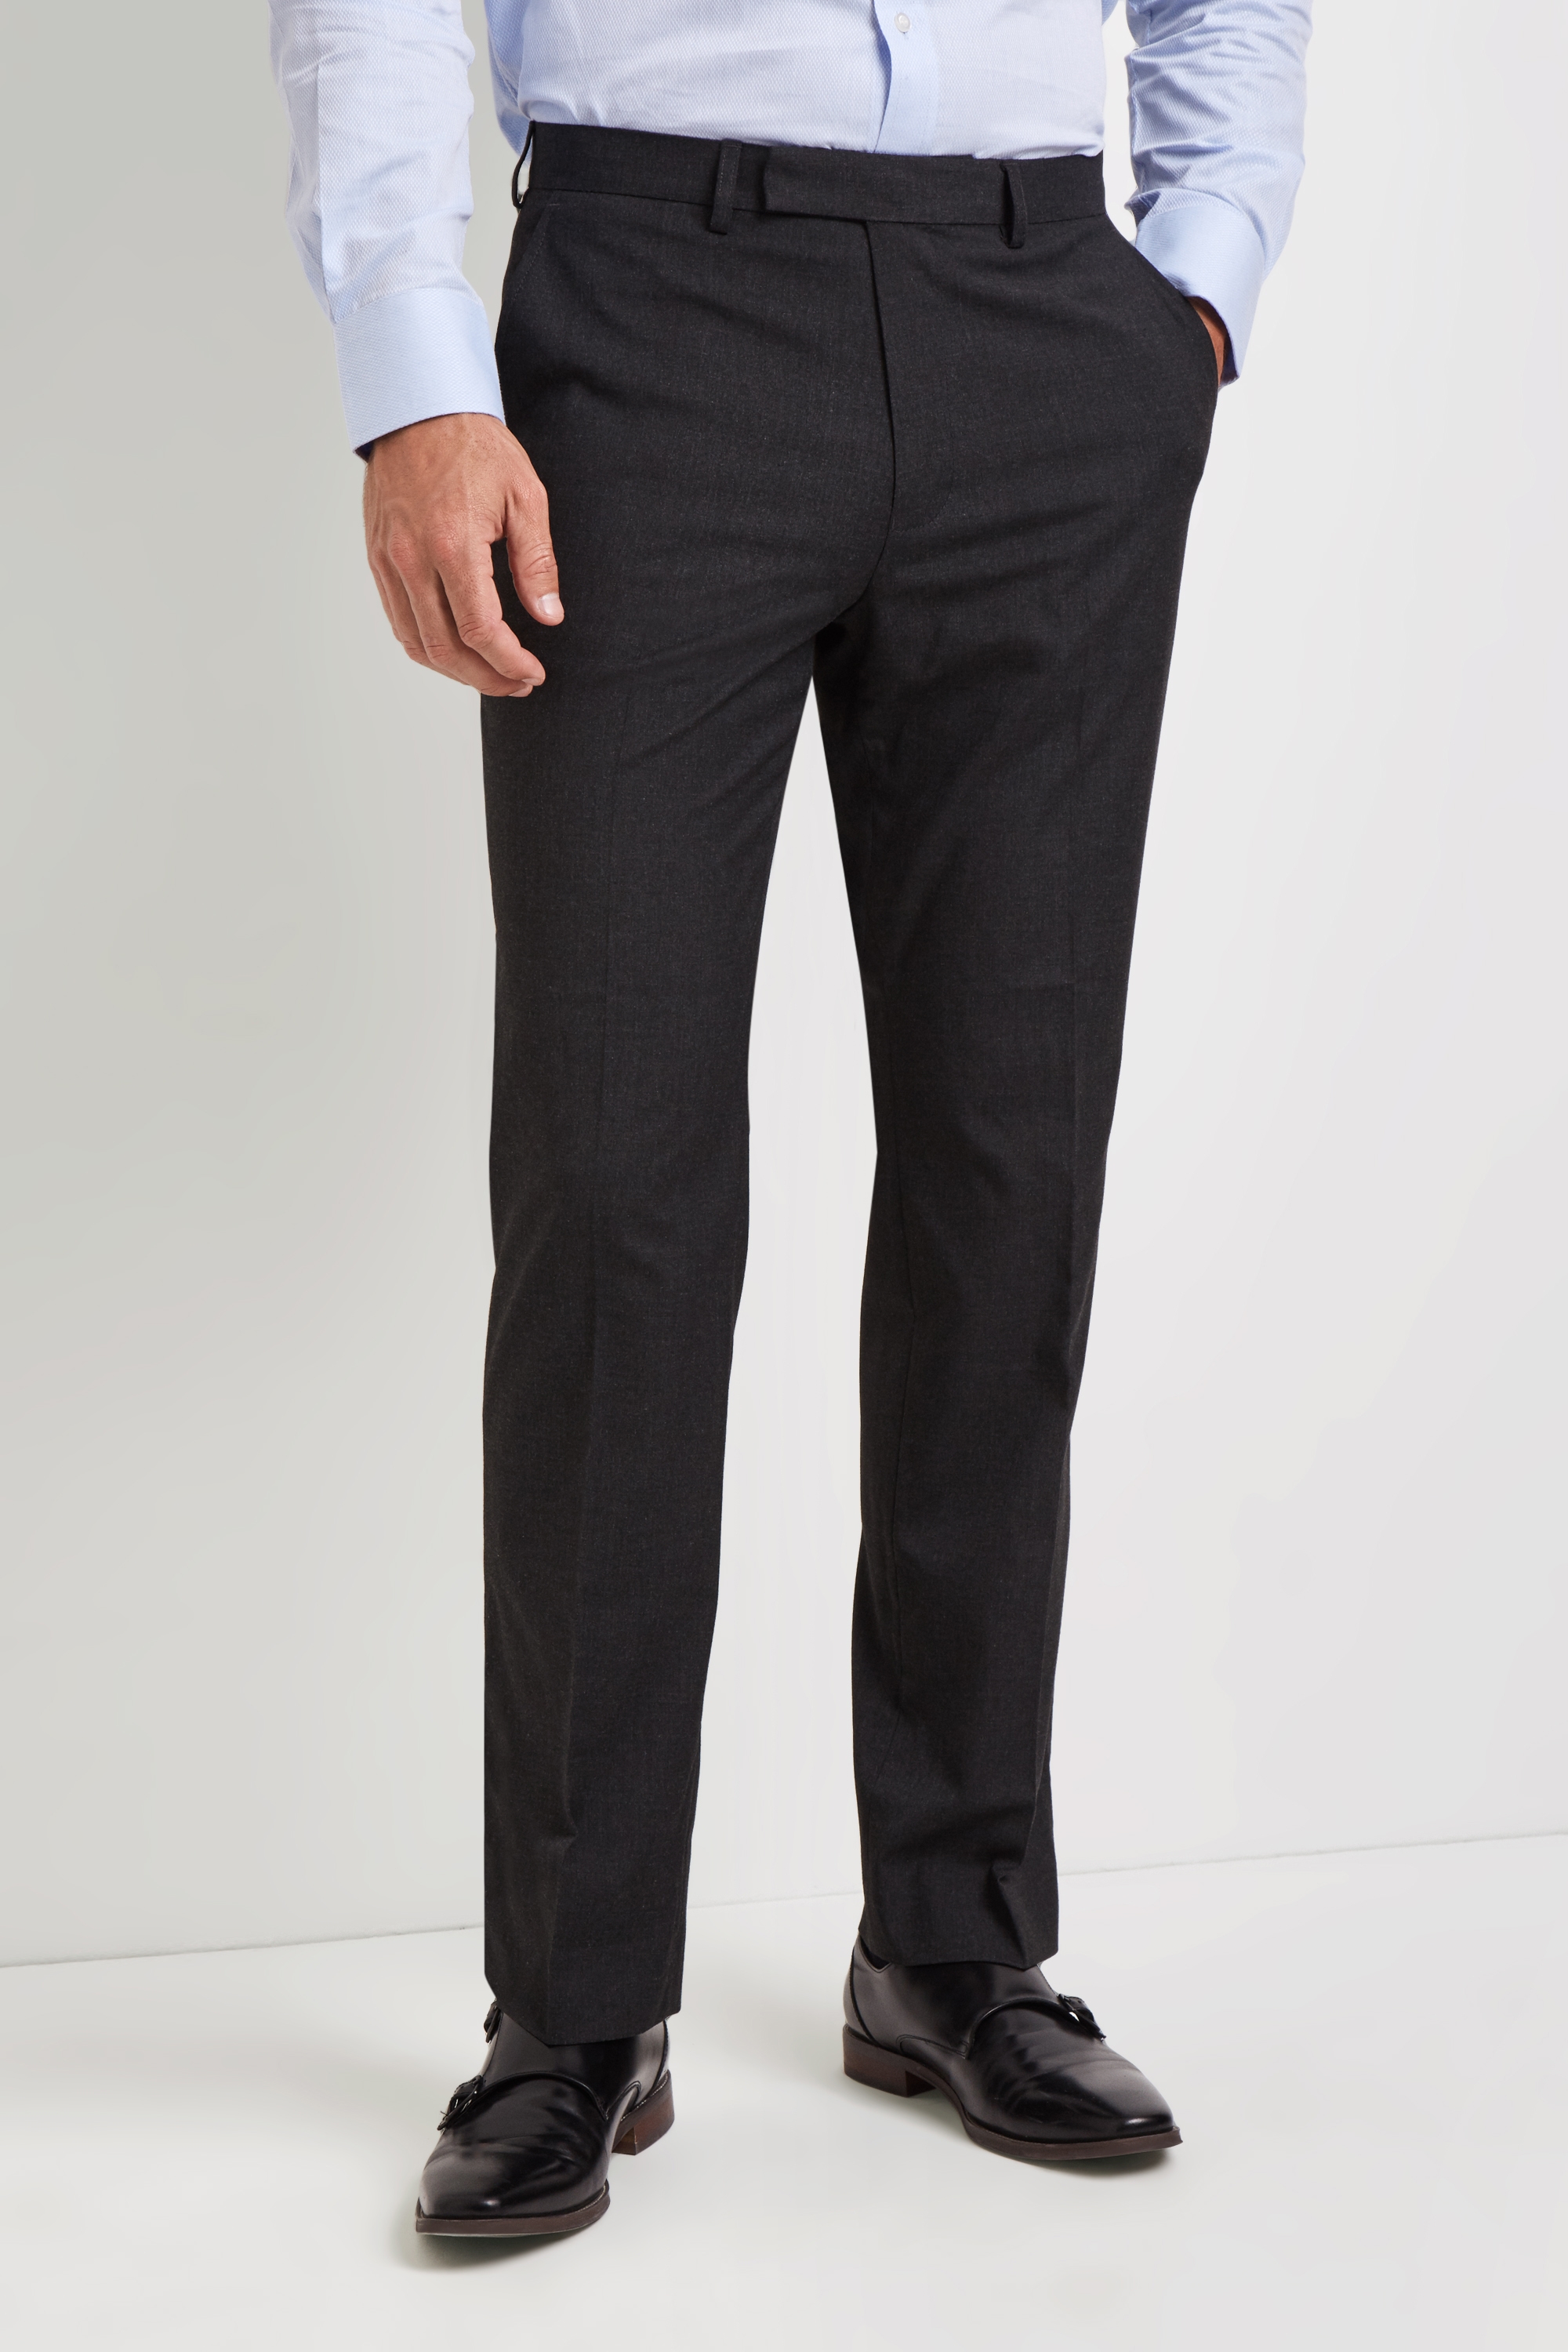 Regular Fit Charcoal Stretch Trousers | Buy Online at Moss